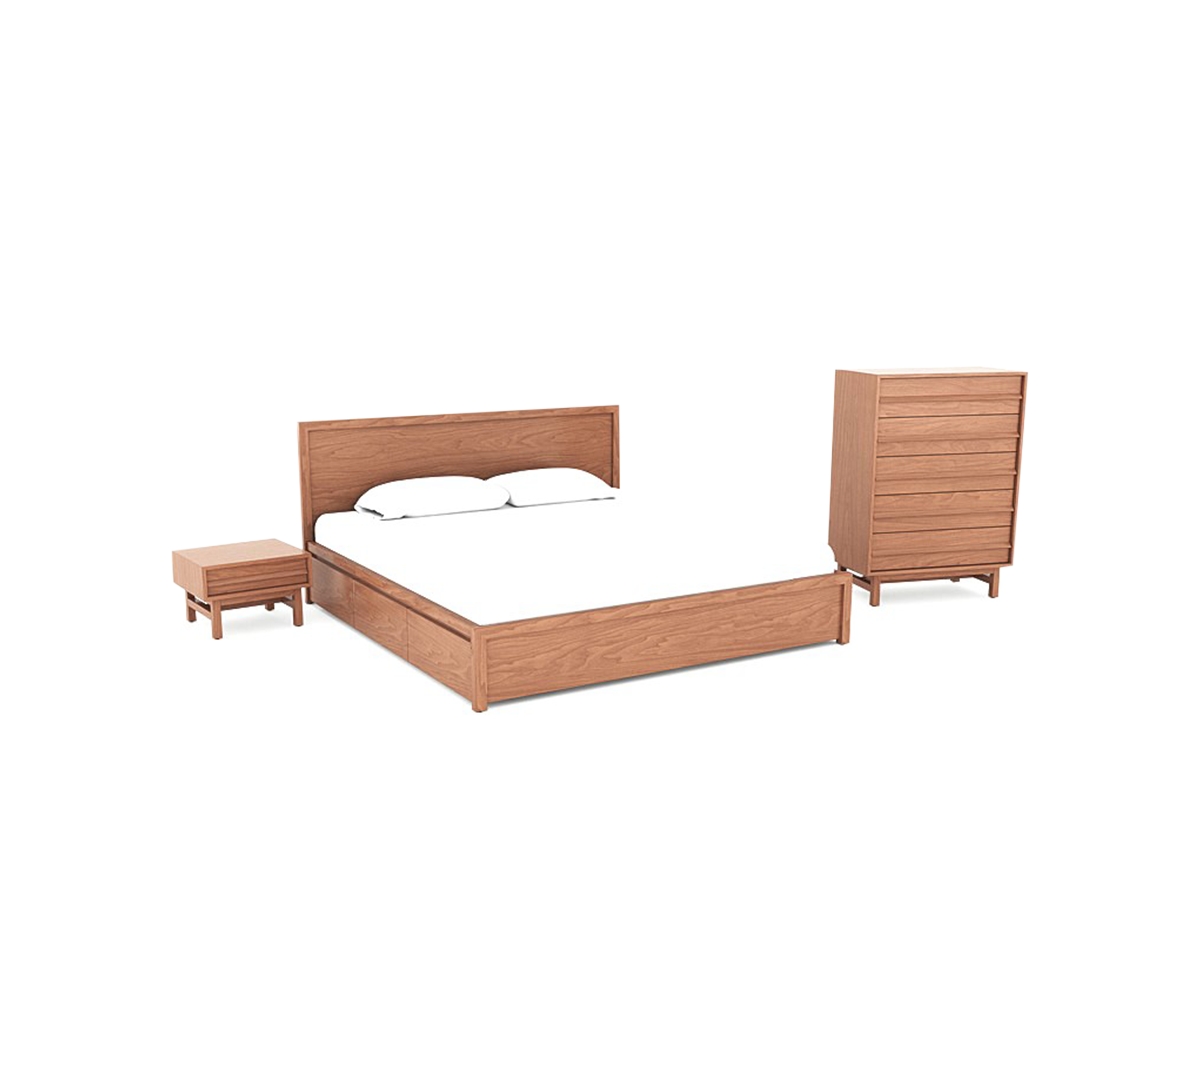 EQ3 CLOSEOUT! BERNIA 3PC BEDROOM SET (KING STORAGE BED + CHEST + OPEN NIGHTSTAND)